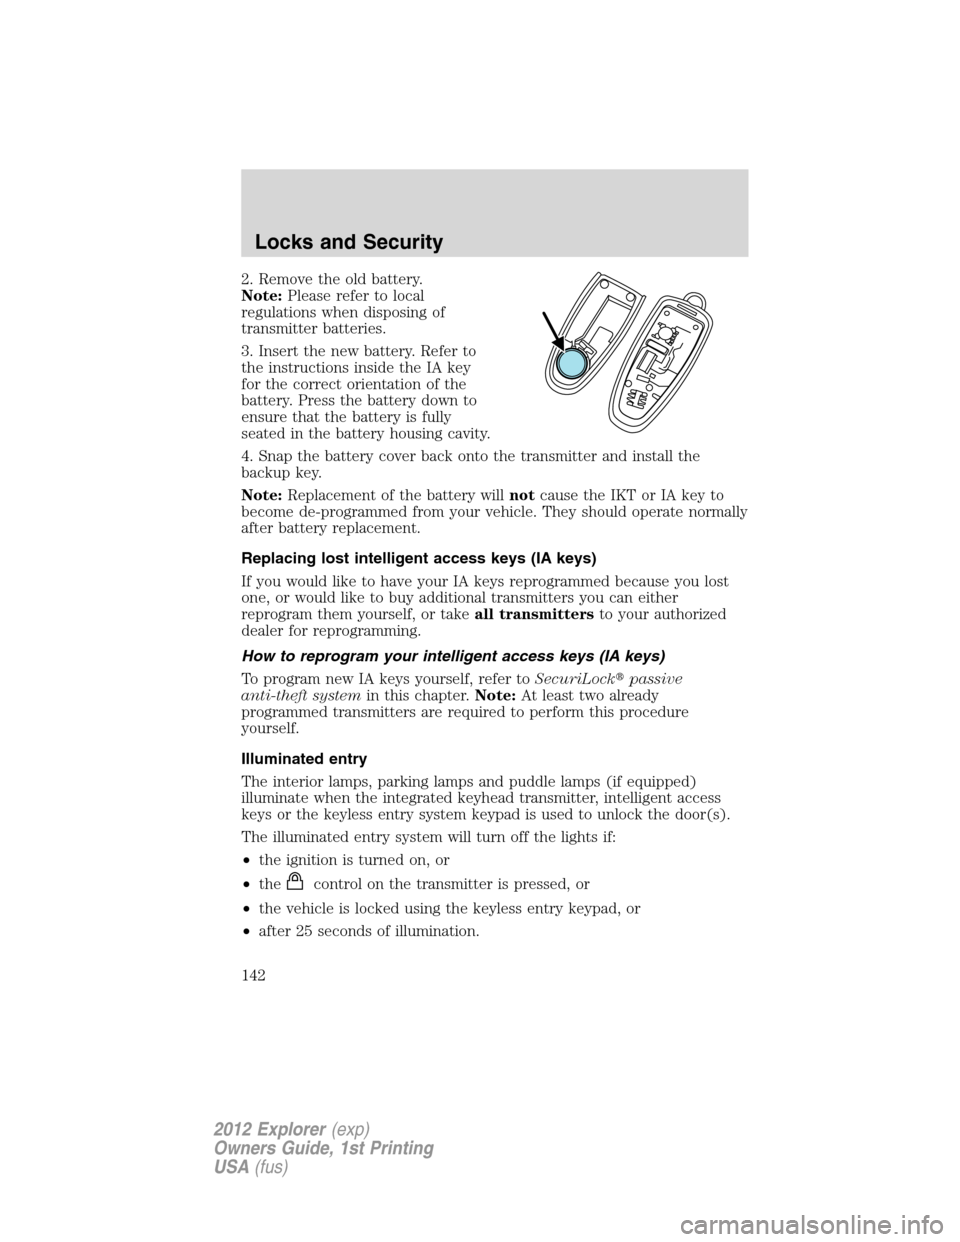 FORD EXPLORER 2012 5.G Owners Manual 2. Remove the old battery.
Note:Please refer to local
regulations when disposing of
transmitter batteries.
3. Insert the new battery. Refer to
the instructions inside the IA key
for the correct orient